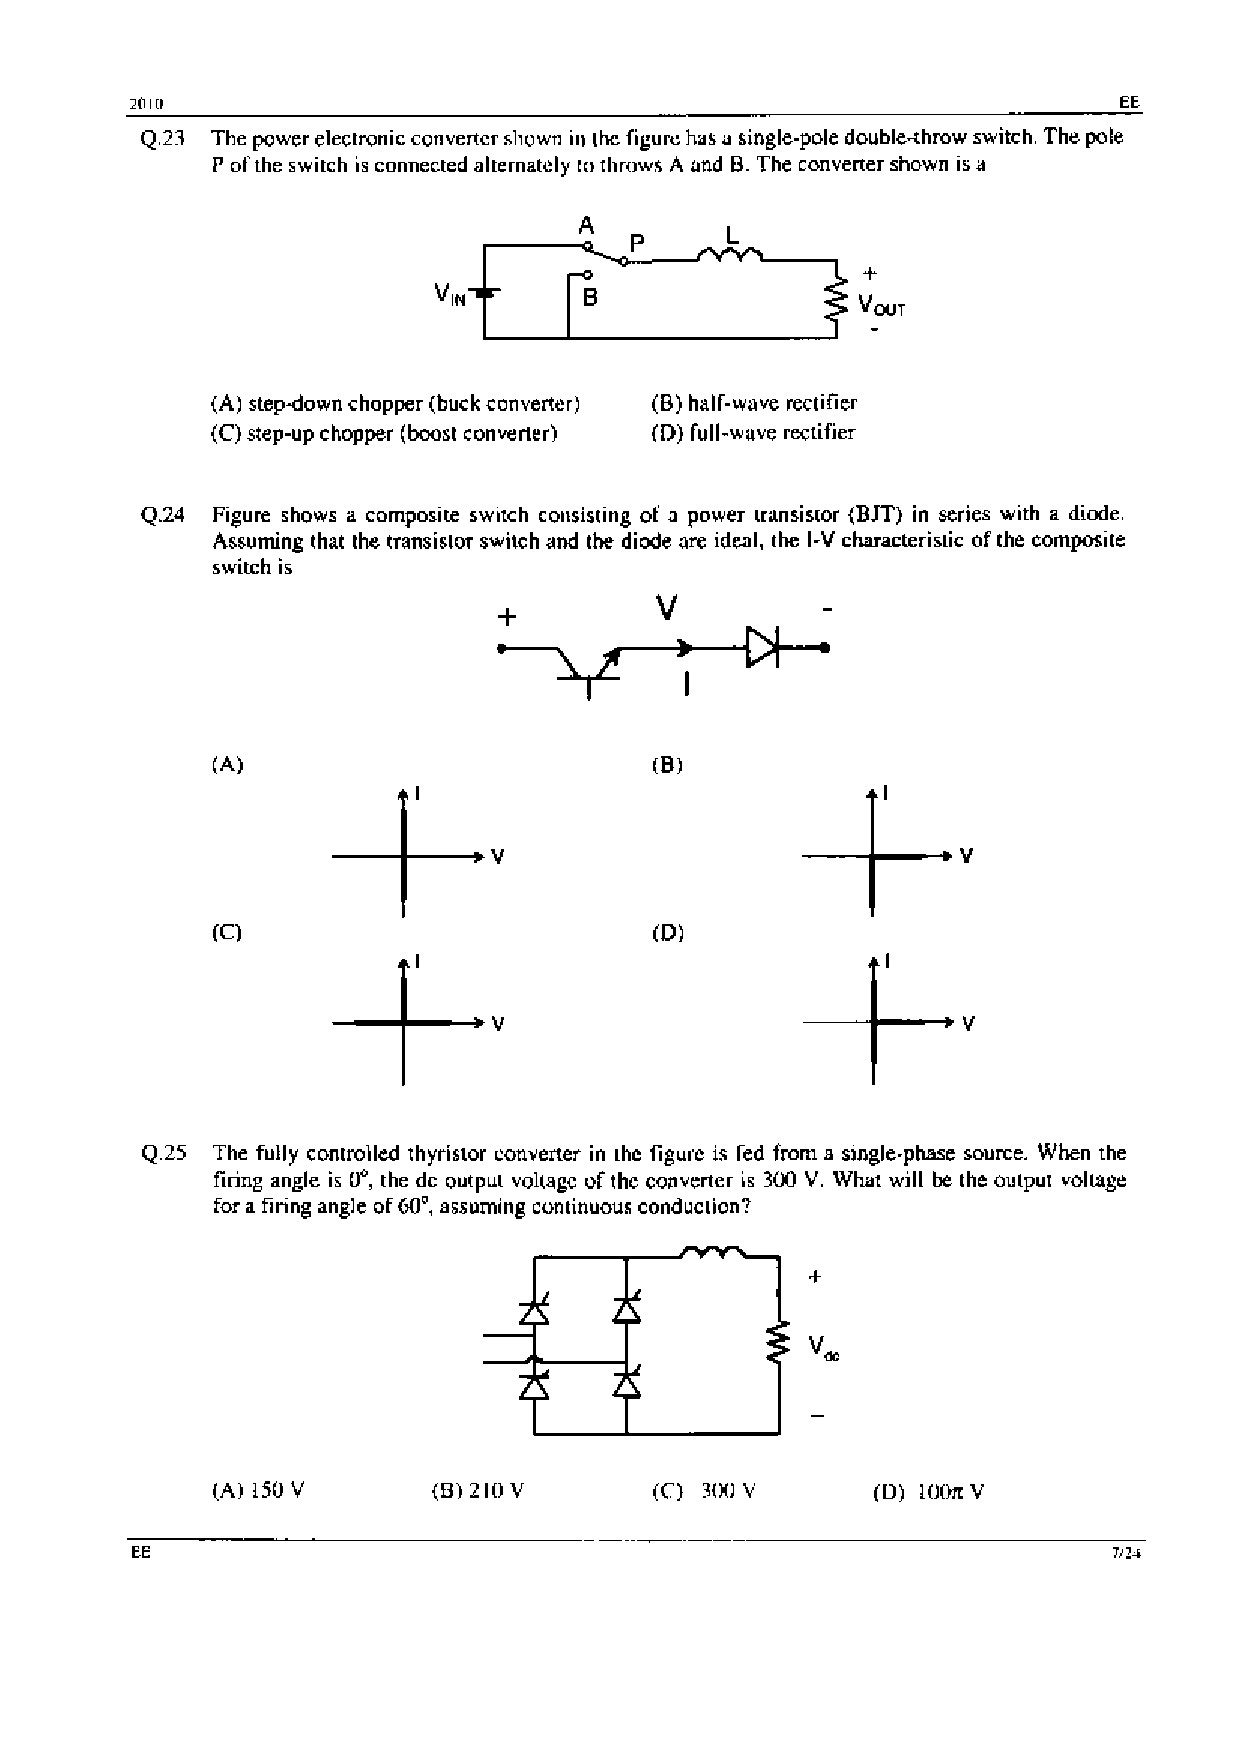 GATE Exam Question Paper 2010 Electrical Engineering 7